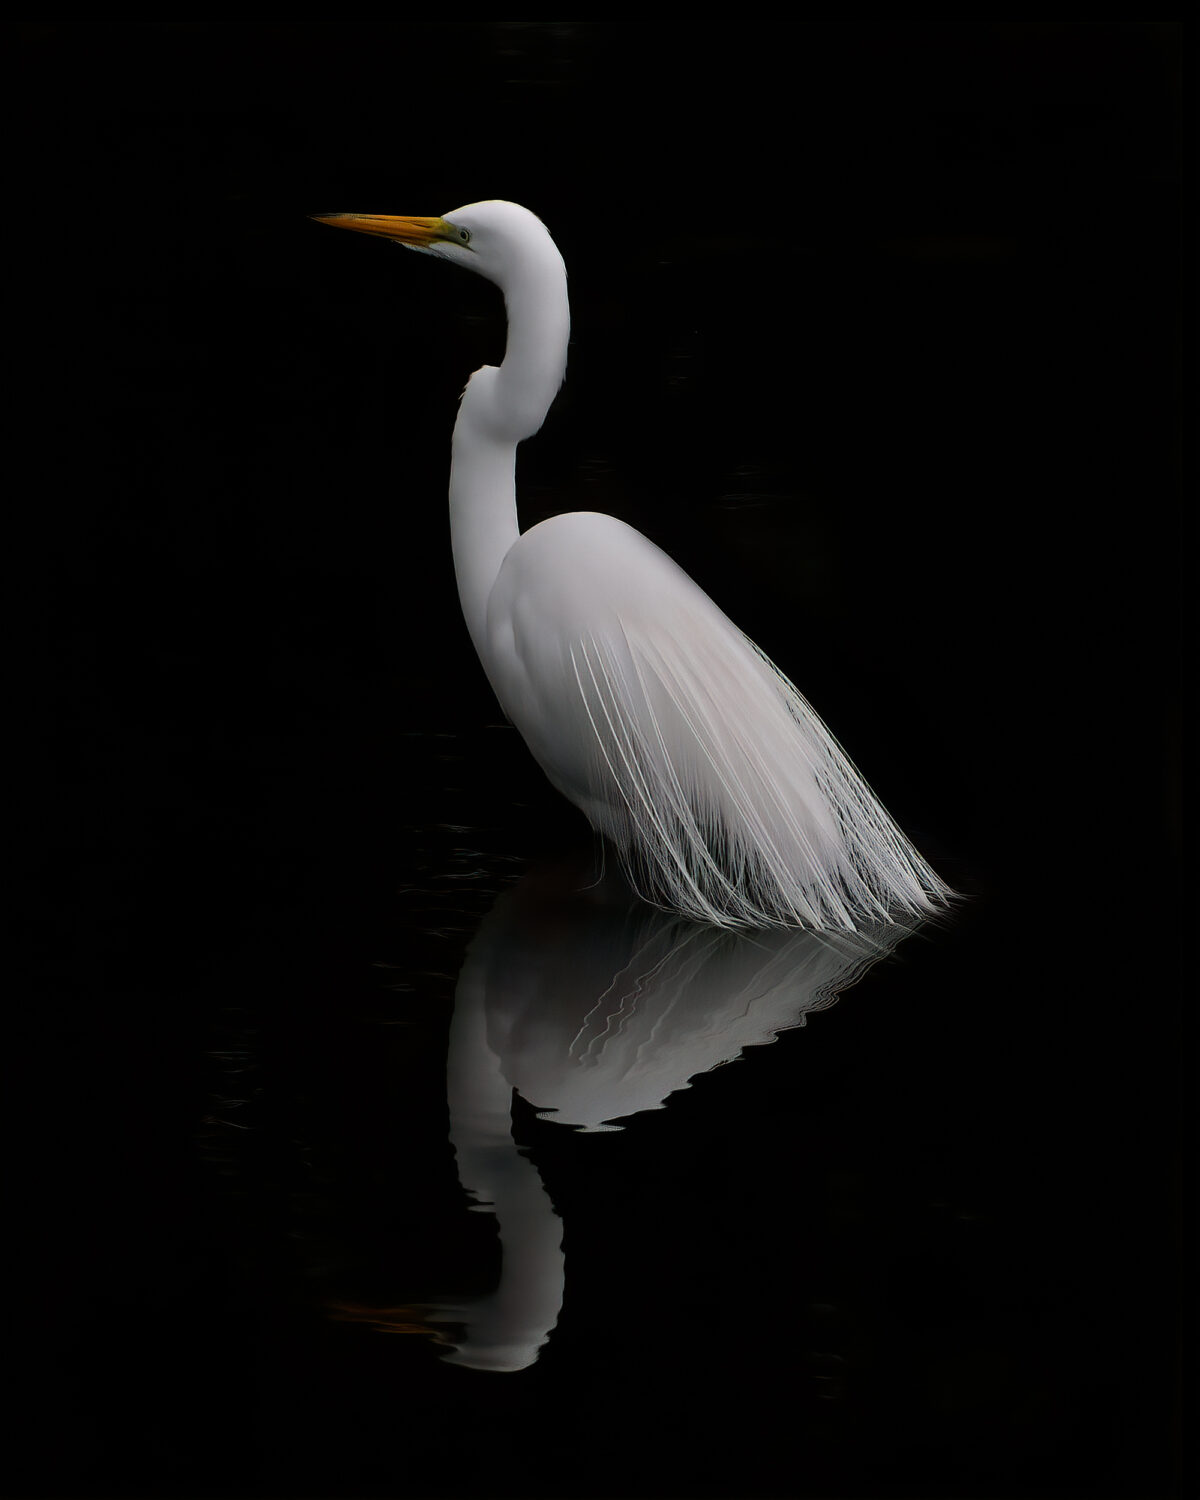 Egret Reflection by Linda ONeill